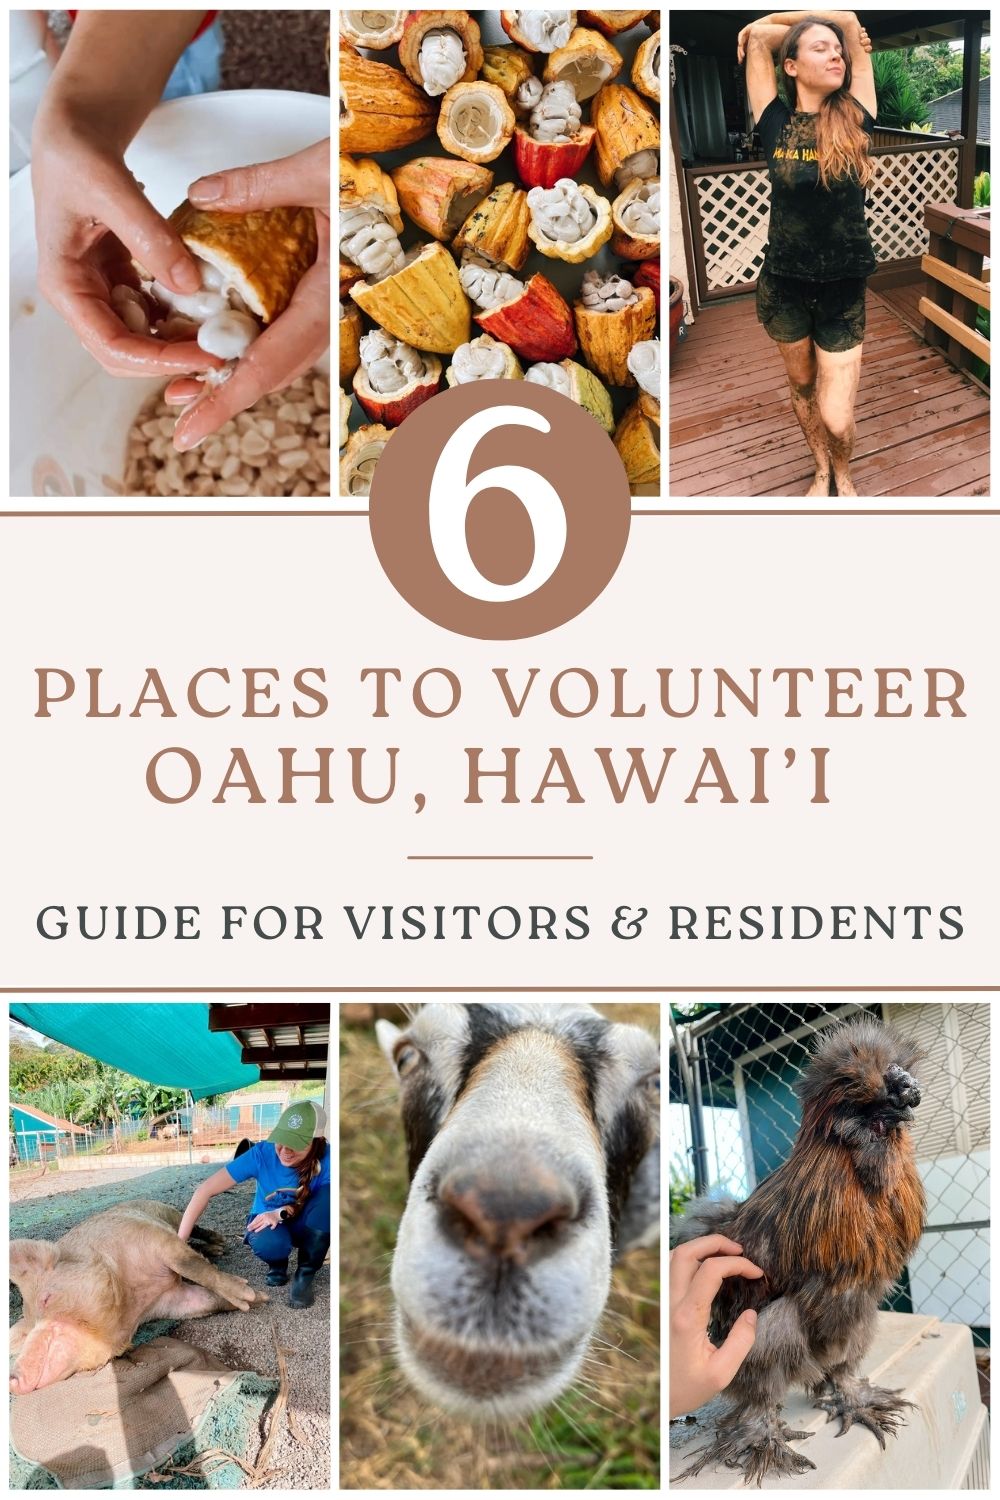 6 Places to Volunteer Oahu Hawai’i | Guide for Visitors & Residents